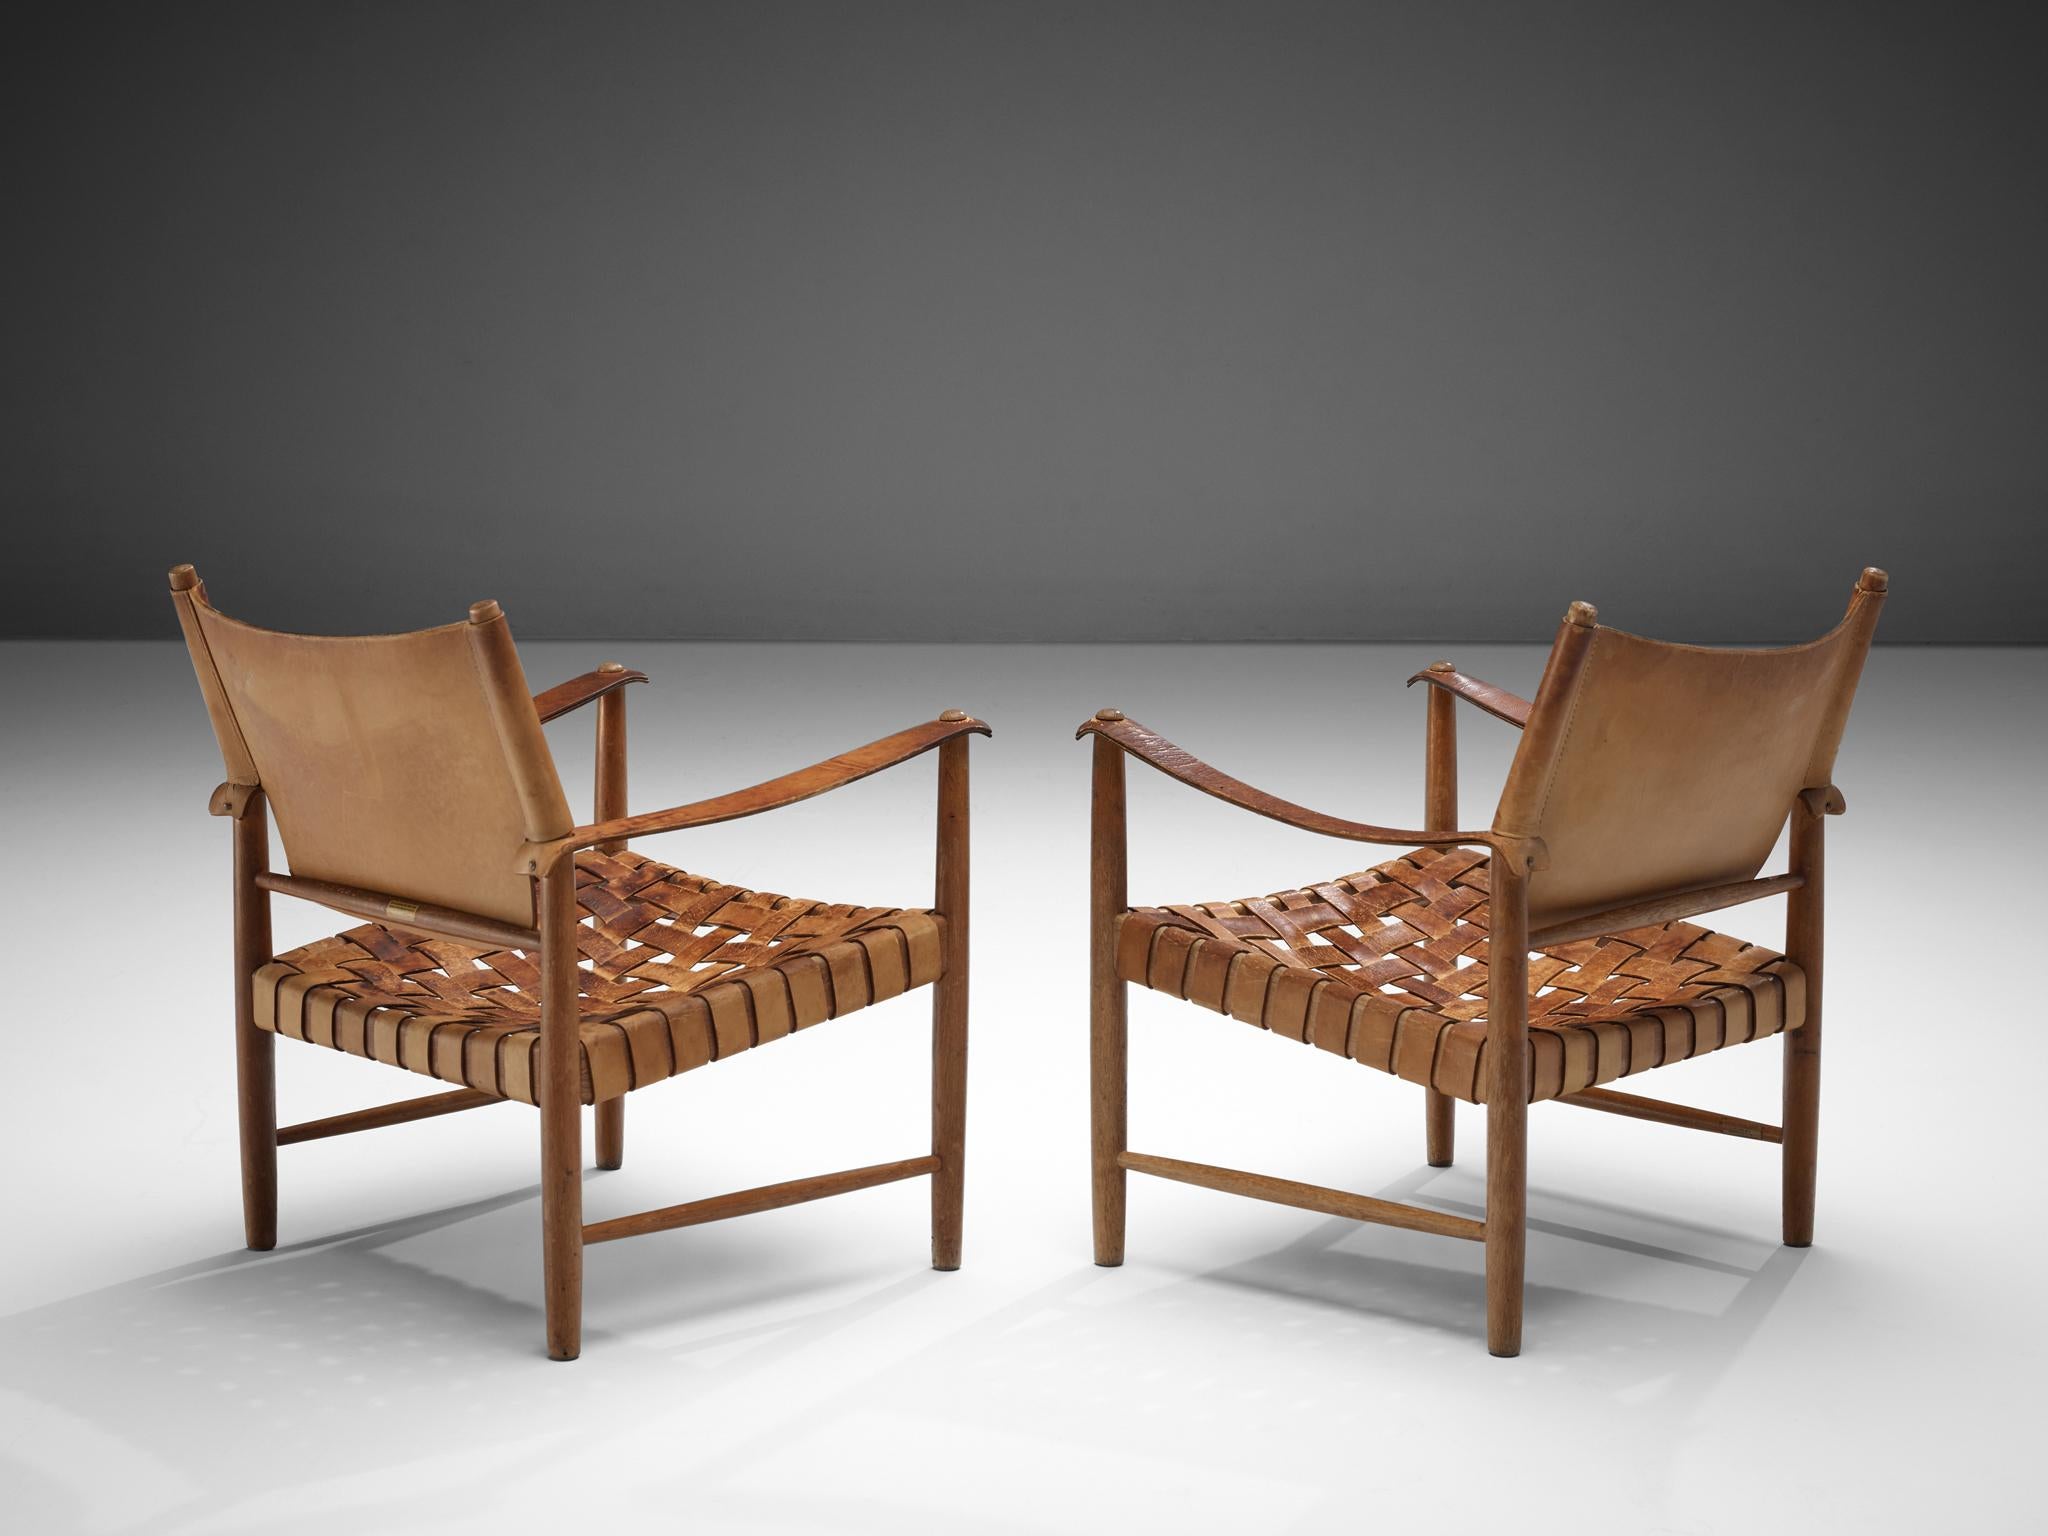 Pair of safari chairs, patinated leather, oak, Europe, 1950s. 

This elegant pair of safari chairs features wonderful patinated leather on both the seat, the arms and back. The patina creates a lively and lived-in character that is achieved because